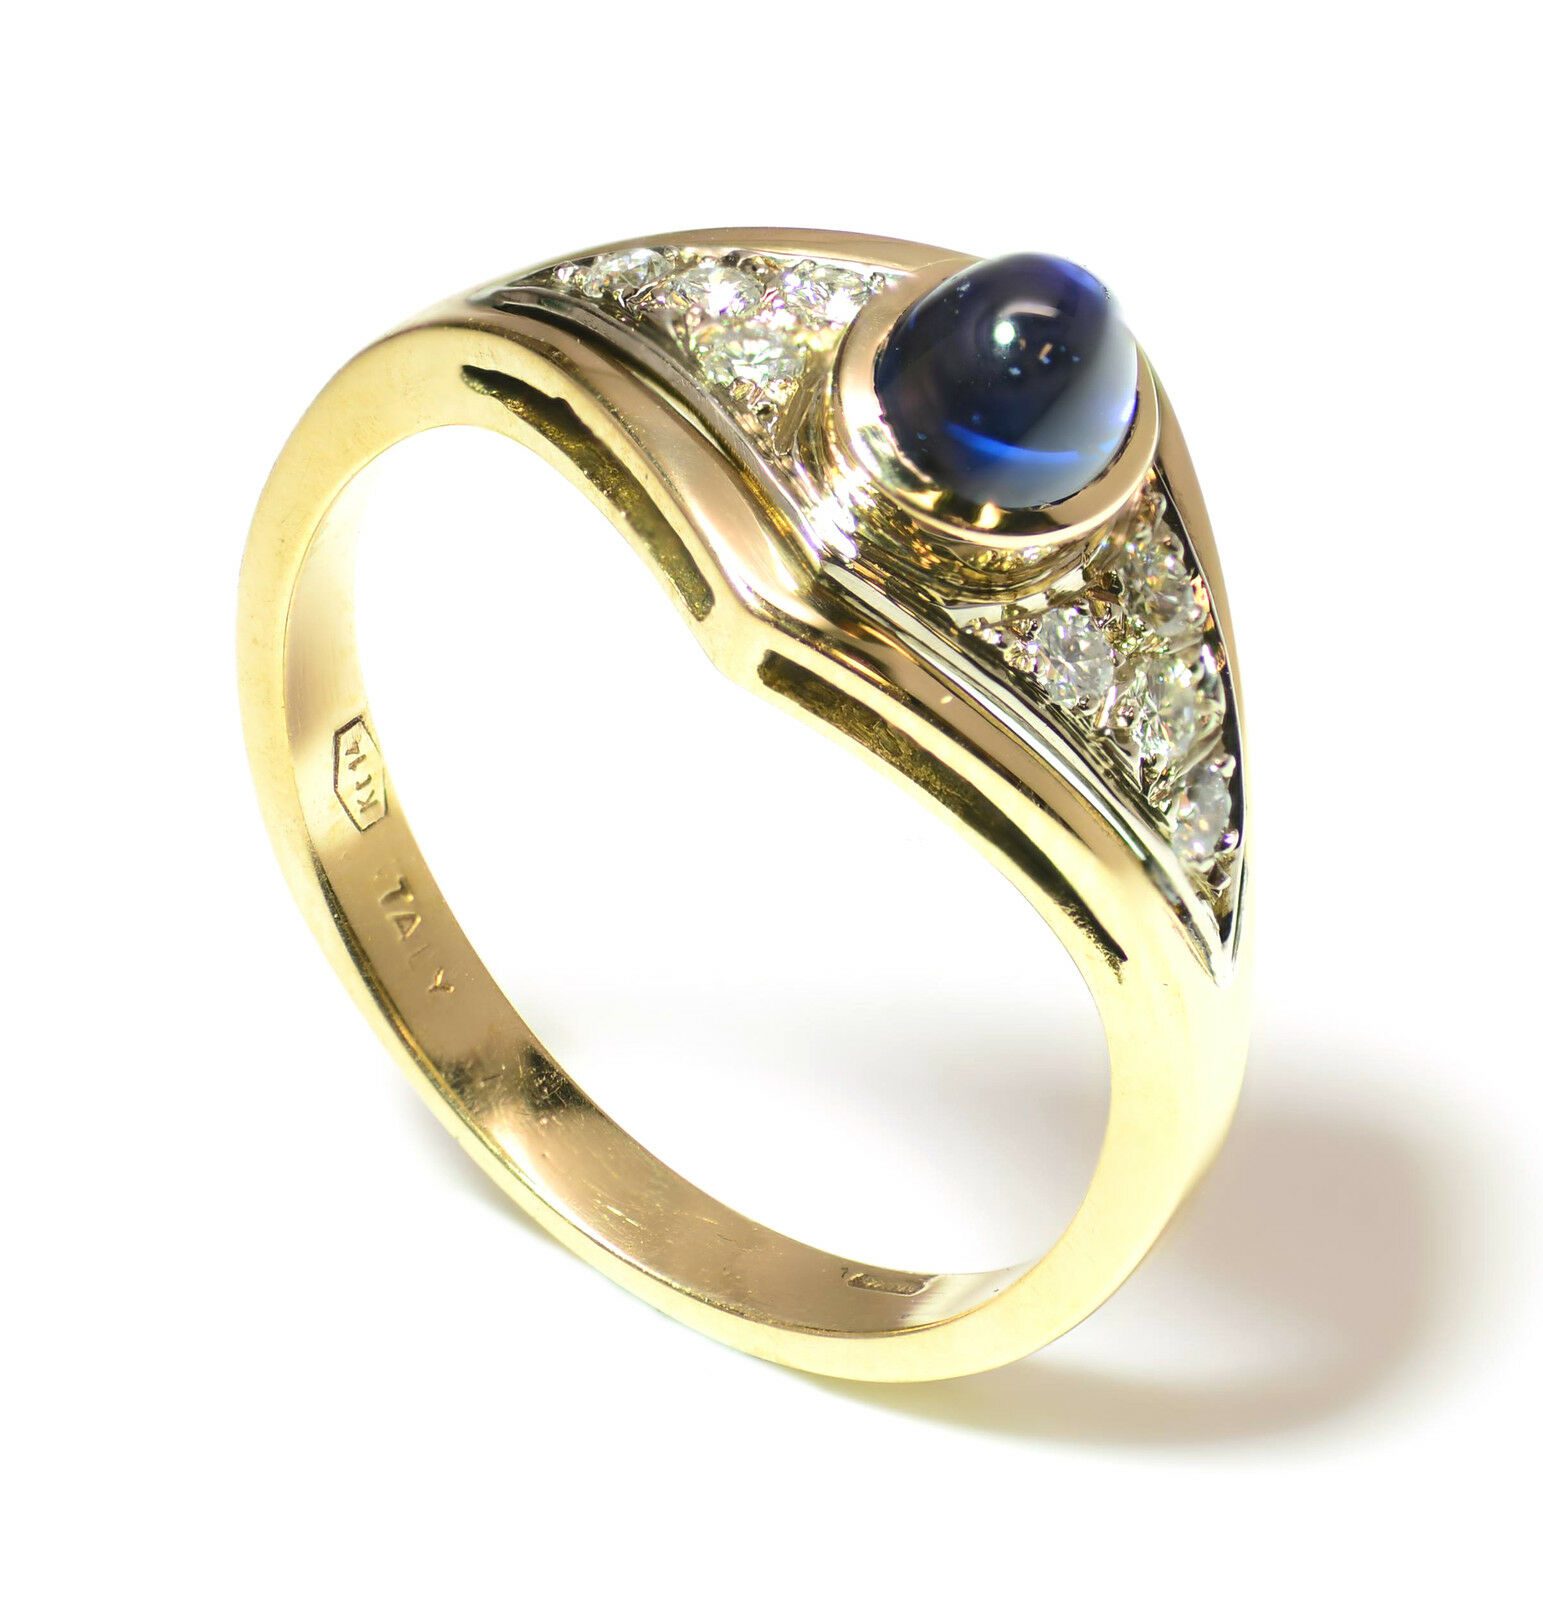 Cabochon-Sapphire-Diamond-Ring-in-14k-Yellow-Gold-16-ct-TW-SIVS-GH-172084340869